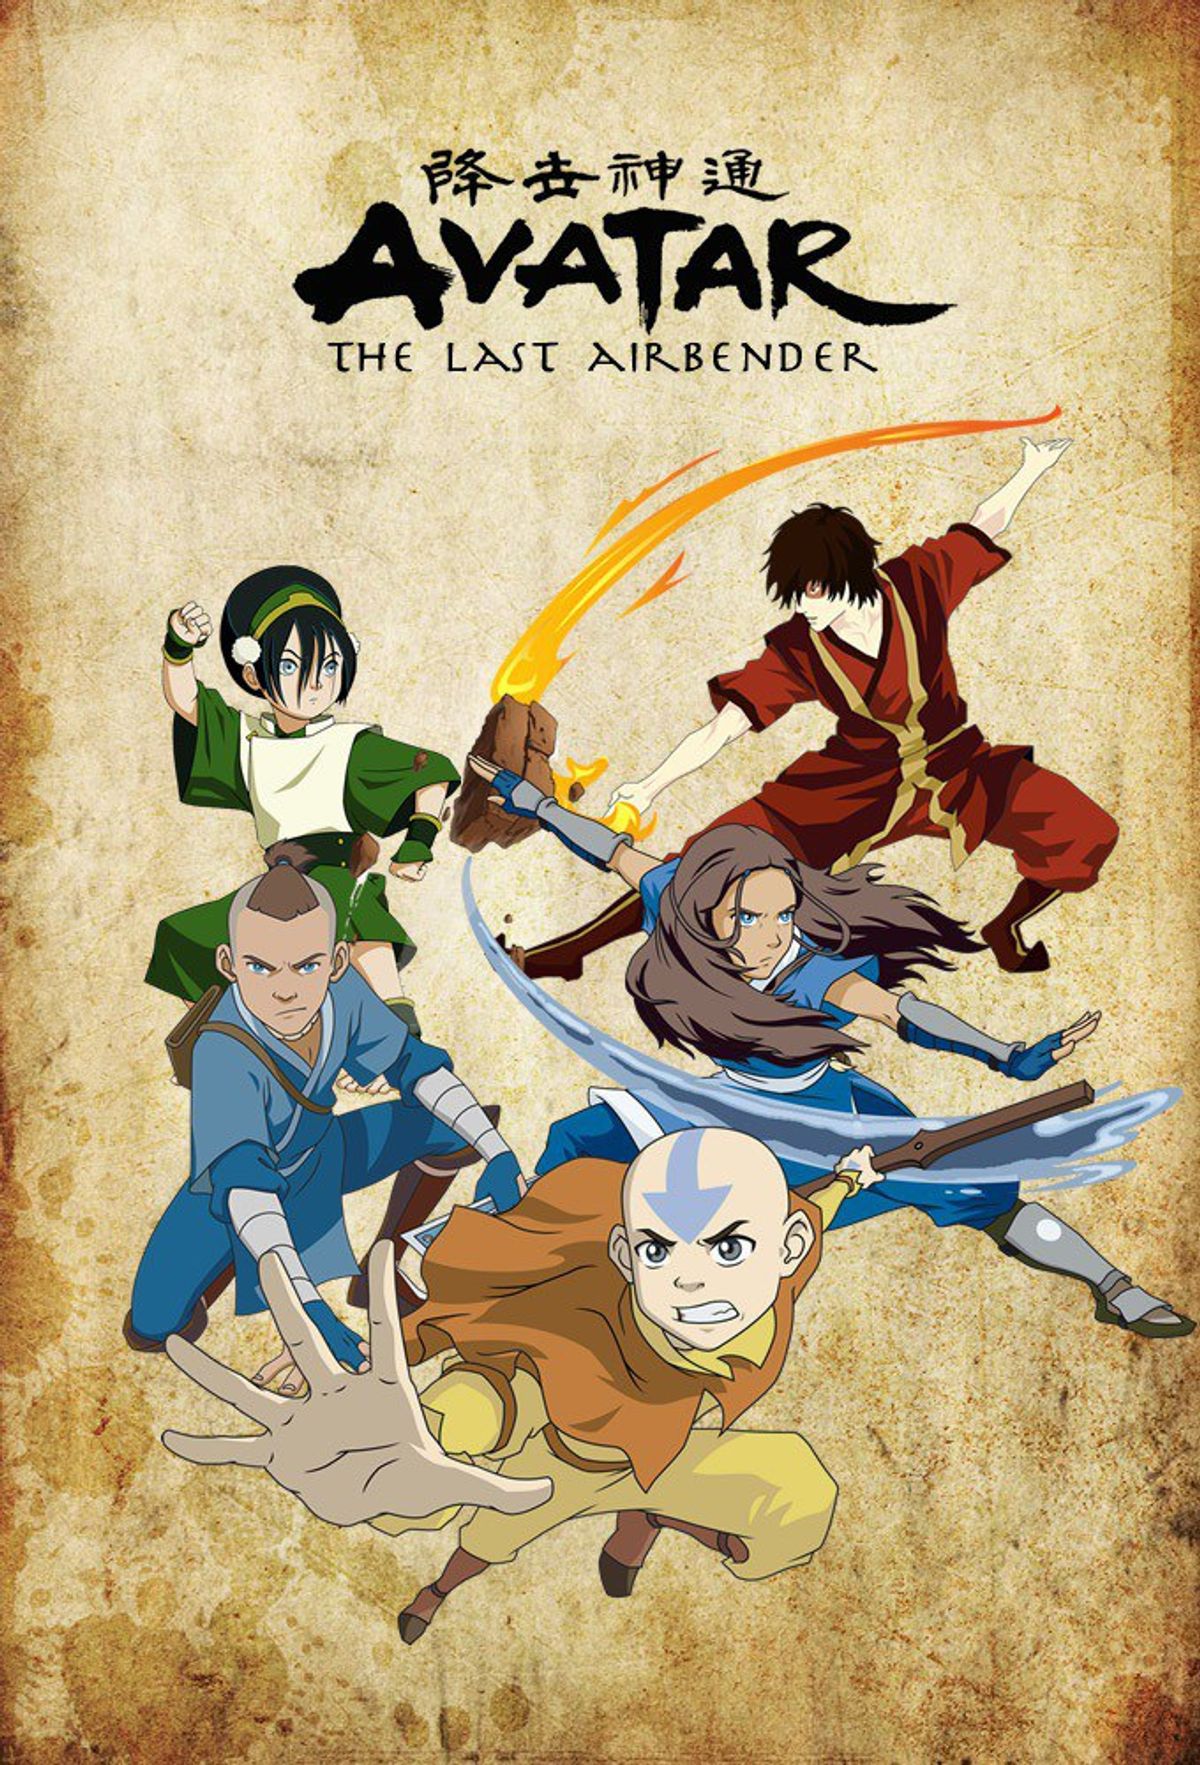 8 Reasons Why We Love 'Avatar:The Last Airbender'